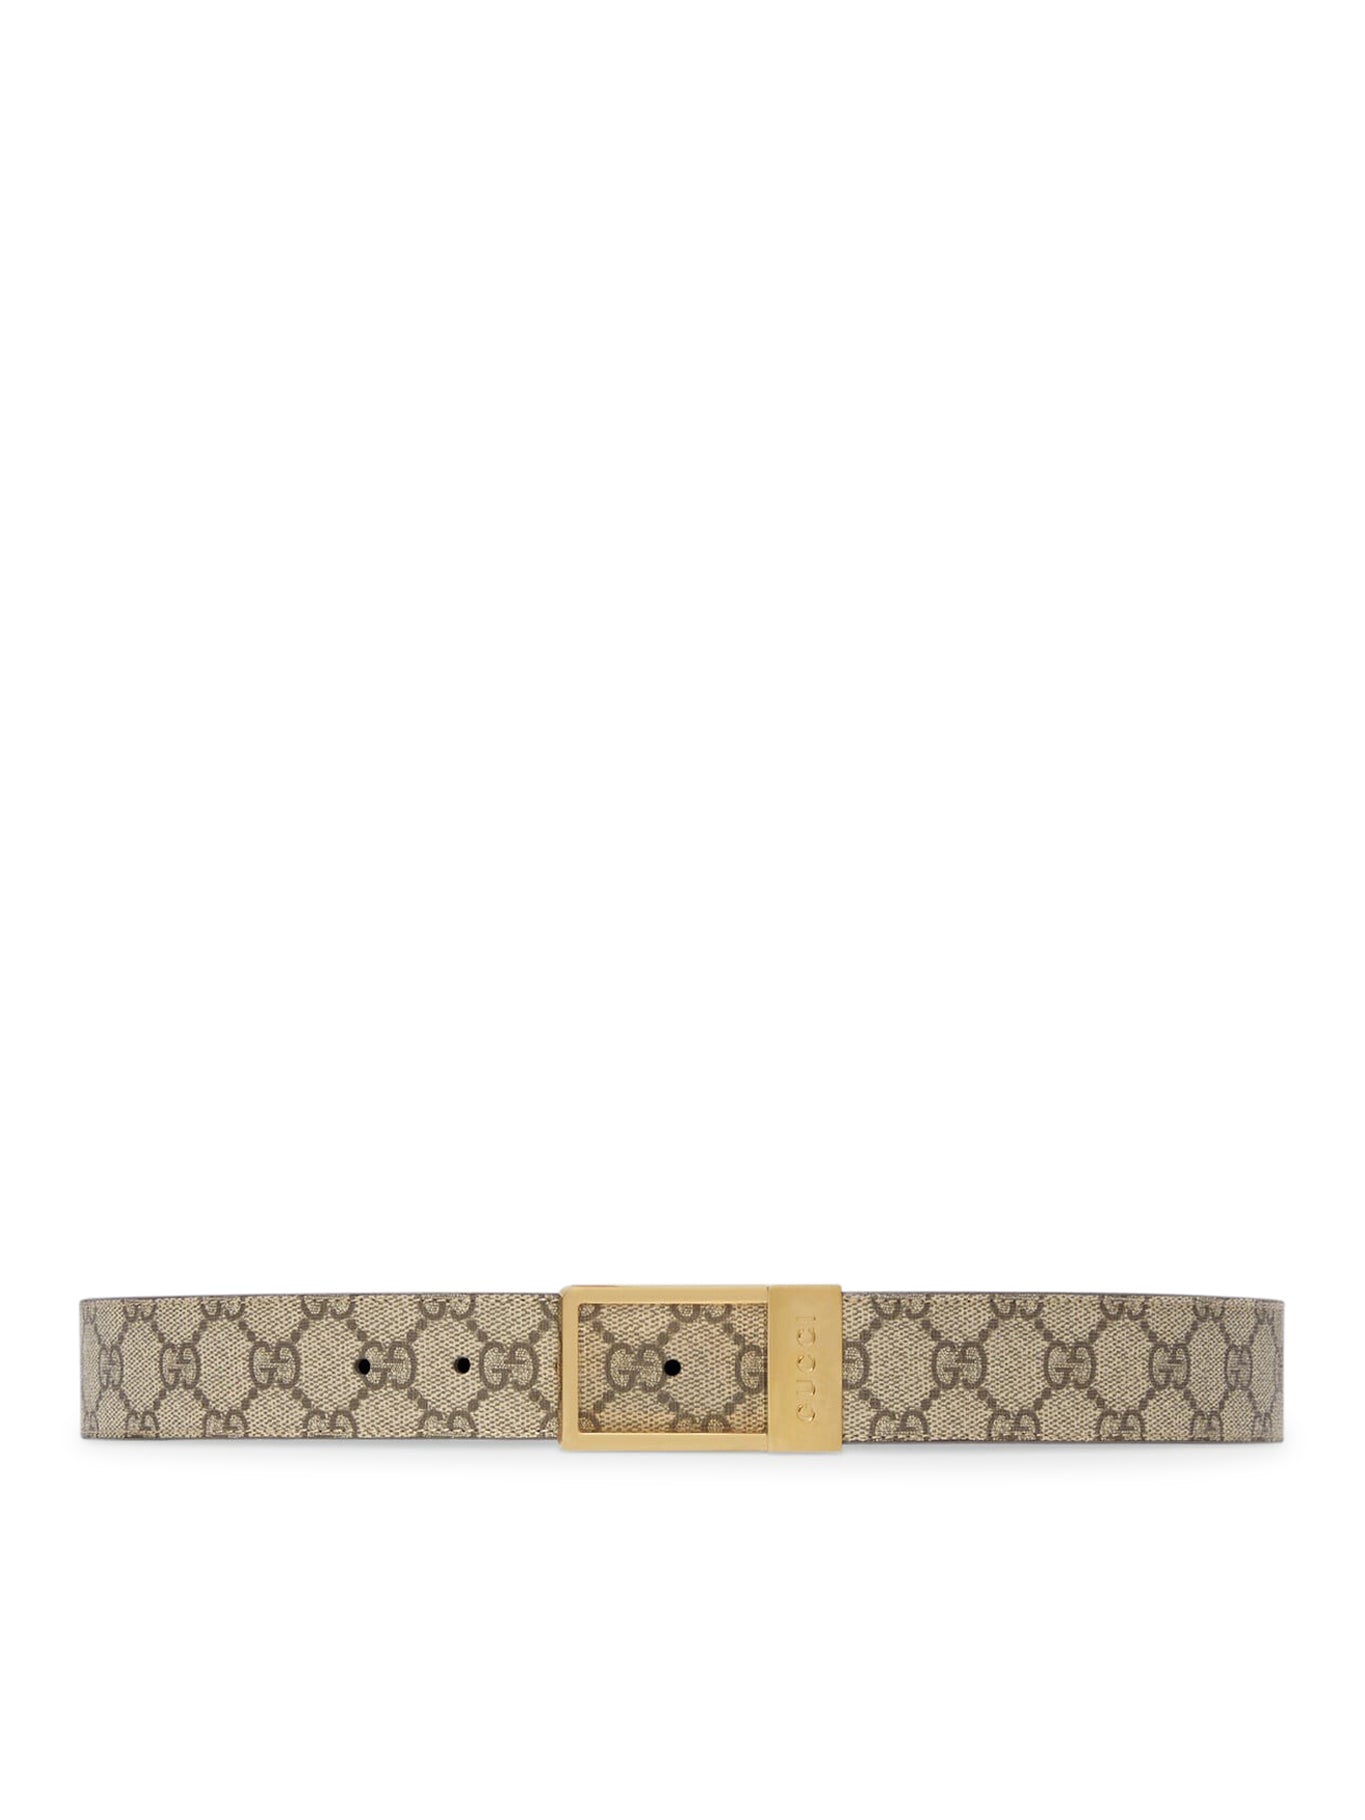 GG belt with rectangular buckle in blue and black Supreme